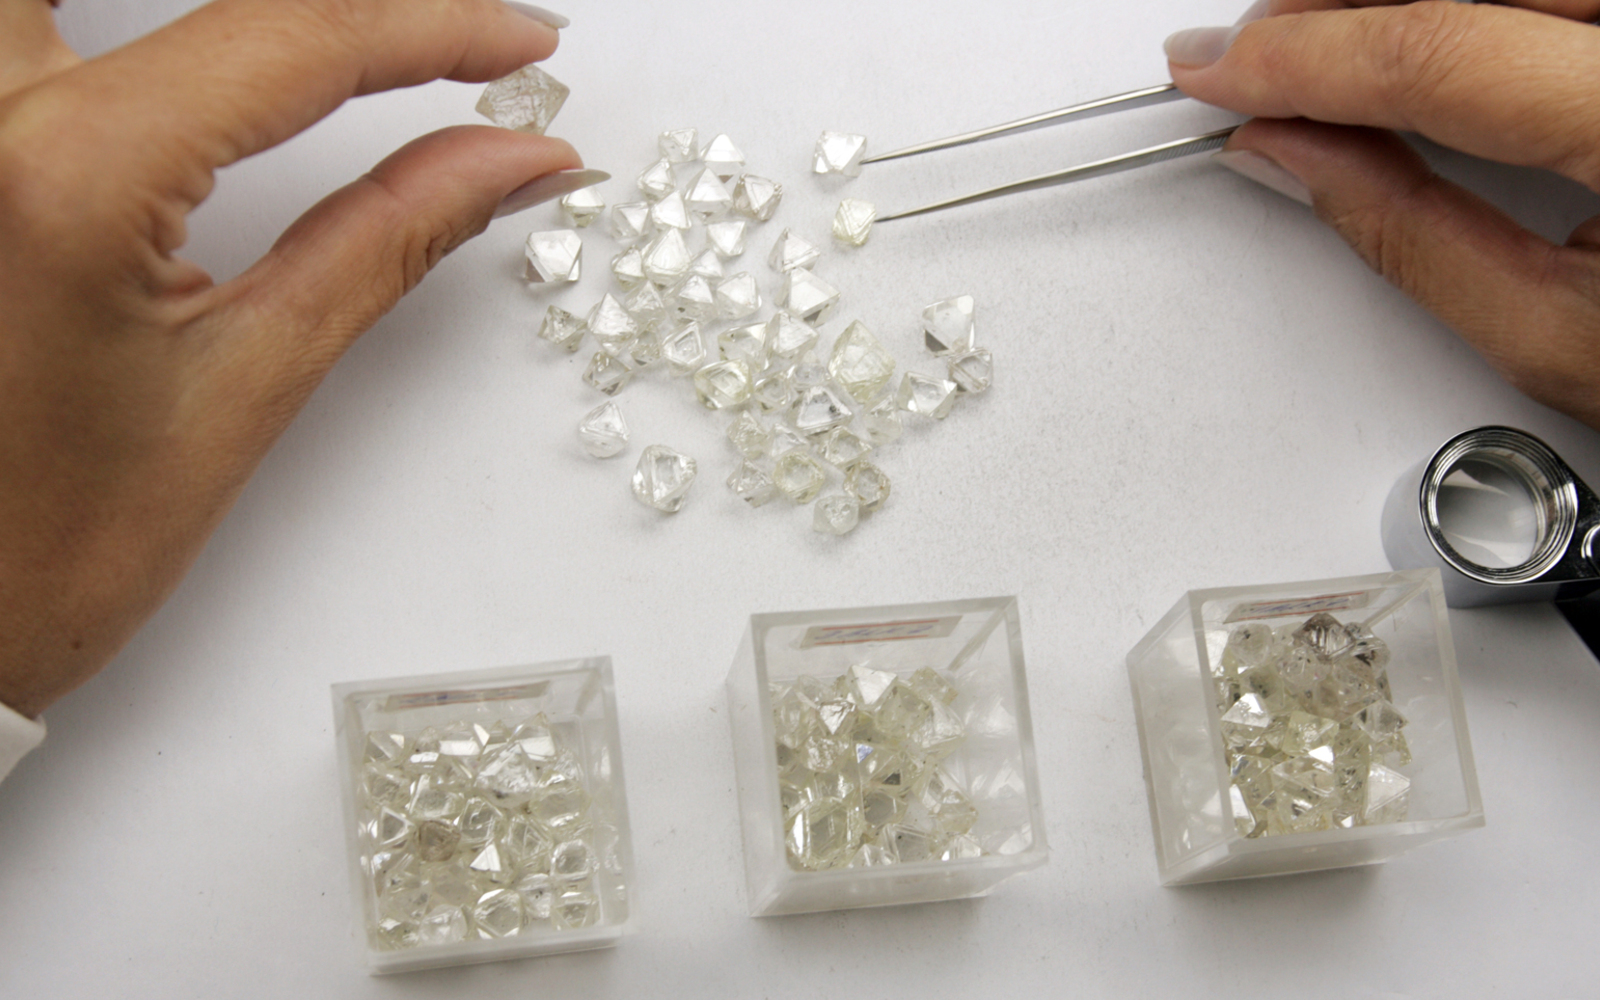 With relaxed taxation and simplified procedures, the direct diamond trade between Russia and India would significantly increase, industry experts believe. Source: press-photo